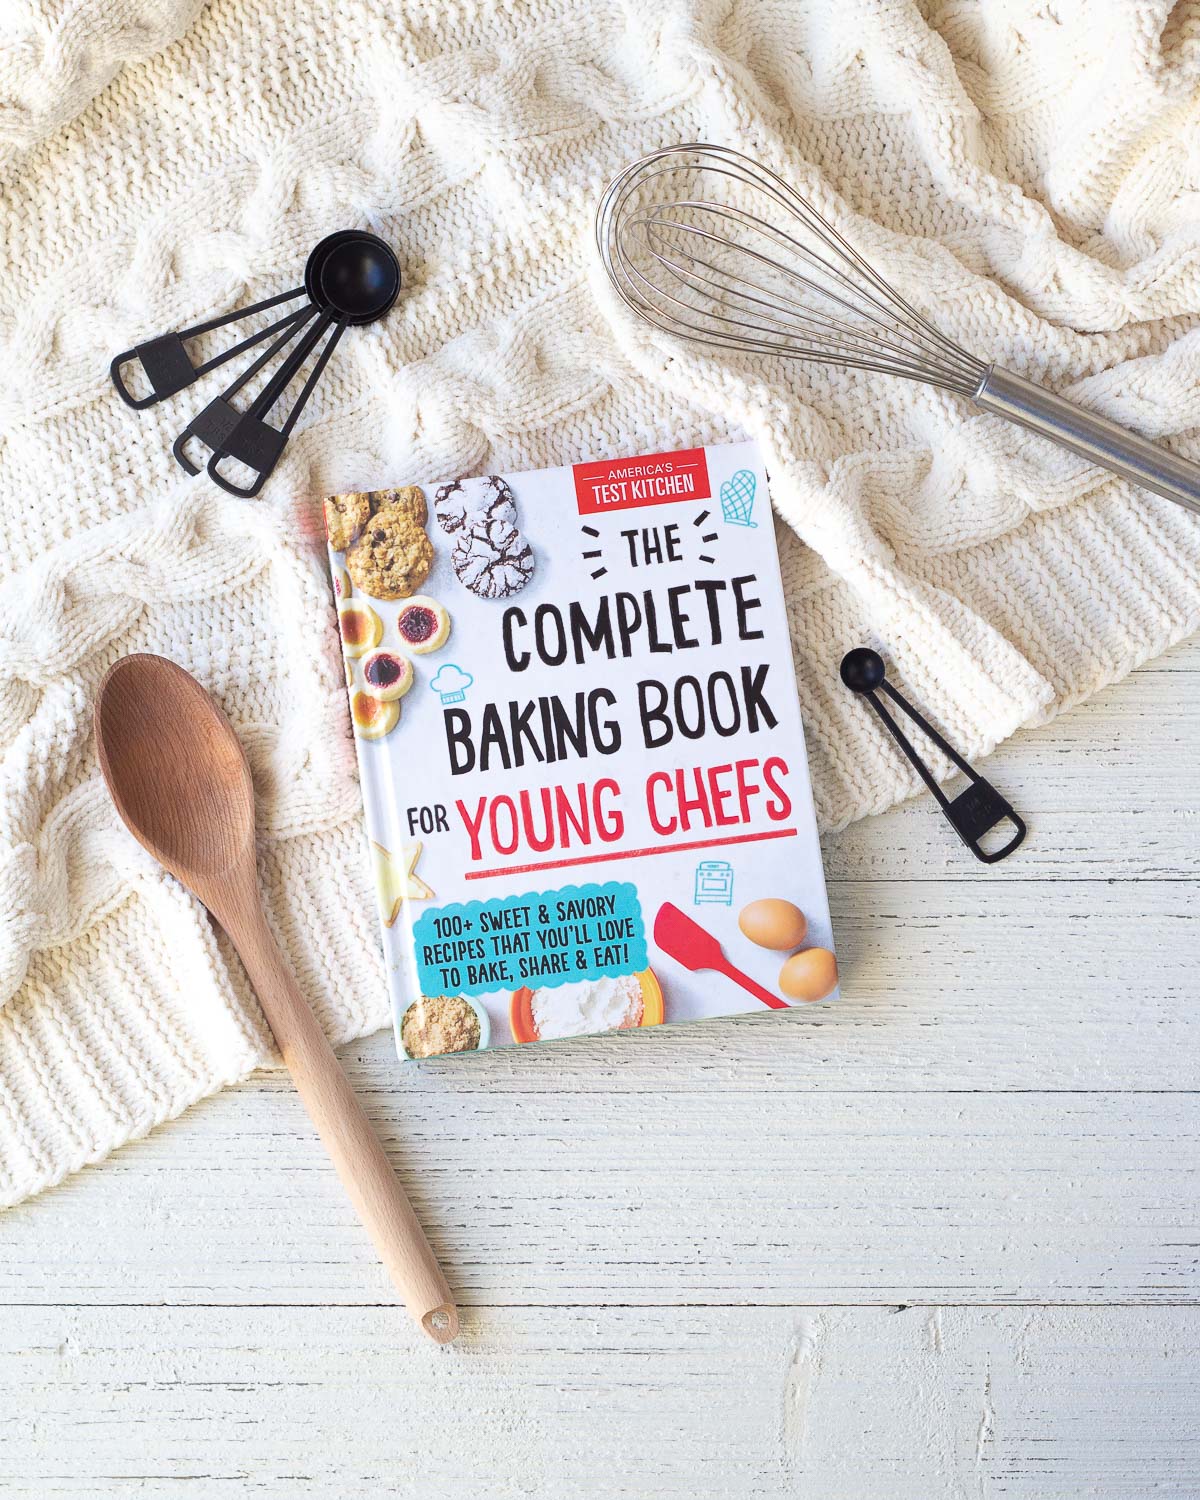 The Complete Baking Book for Young Chefs (a cookbook) on a wooden surface.